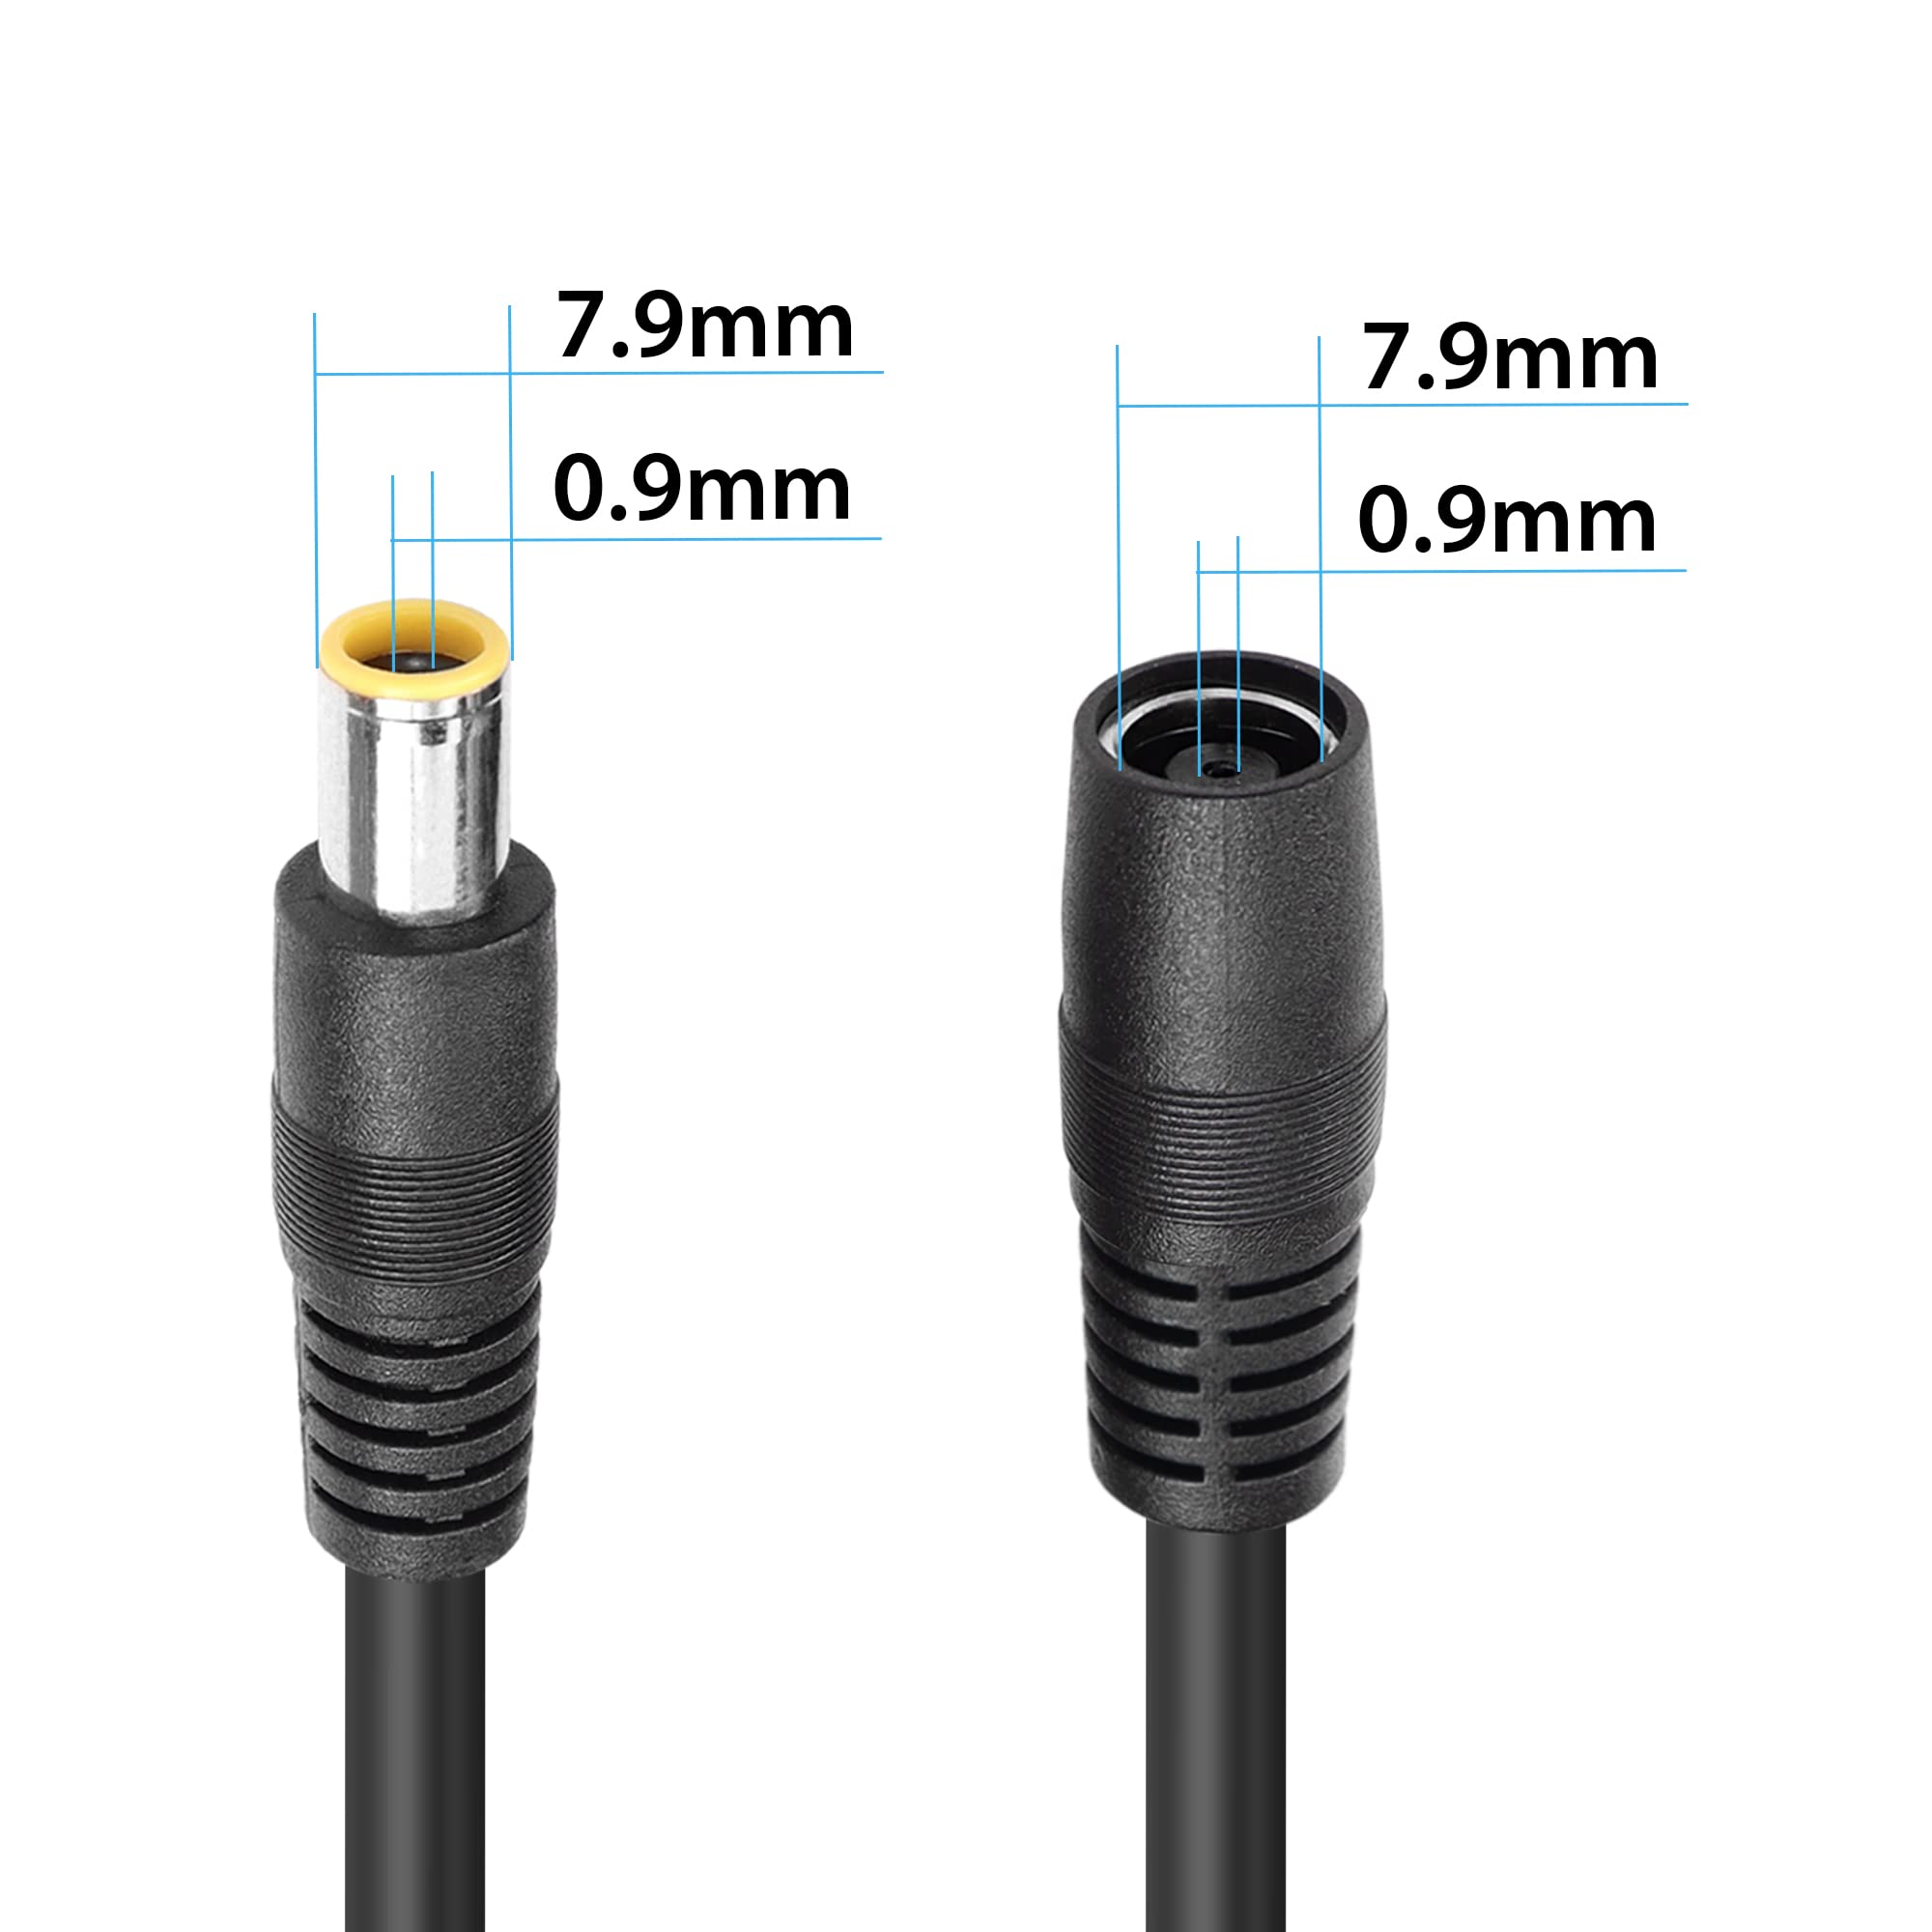 RIIEYOCA DC 8mm Y Branch Parallel Adapter Cable, 3.2FT 14AWG DC8mm 1 Male to 2 Female Solar Panel Power Cable,with DC7909 Male Female Converter,for Portable Power Station Solar Panel(1m/3ft)